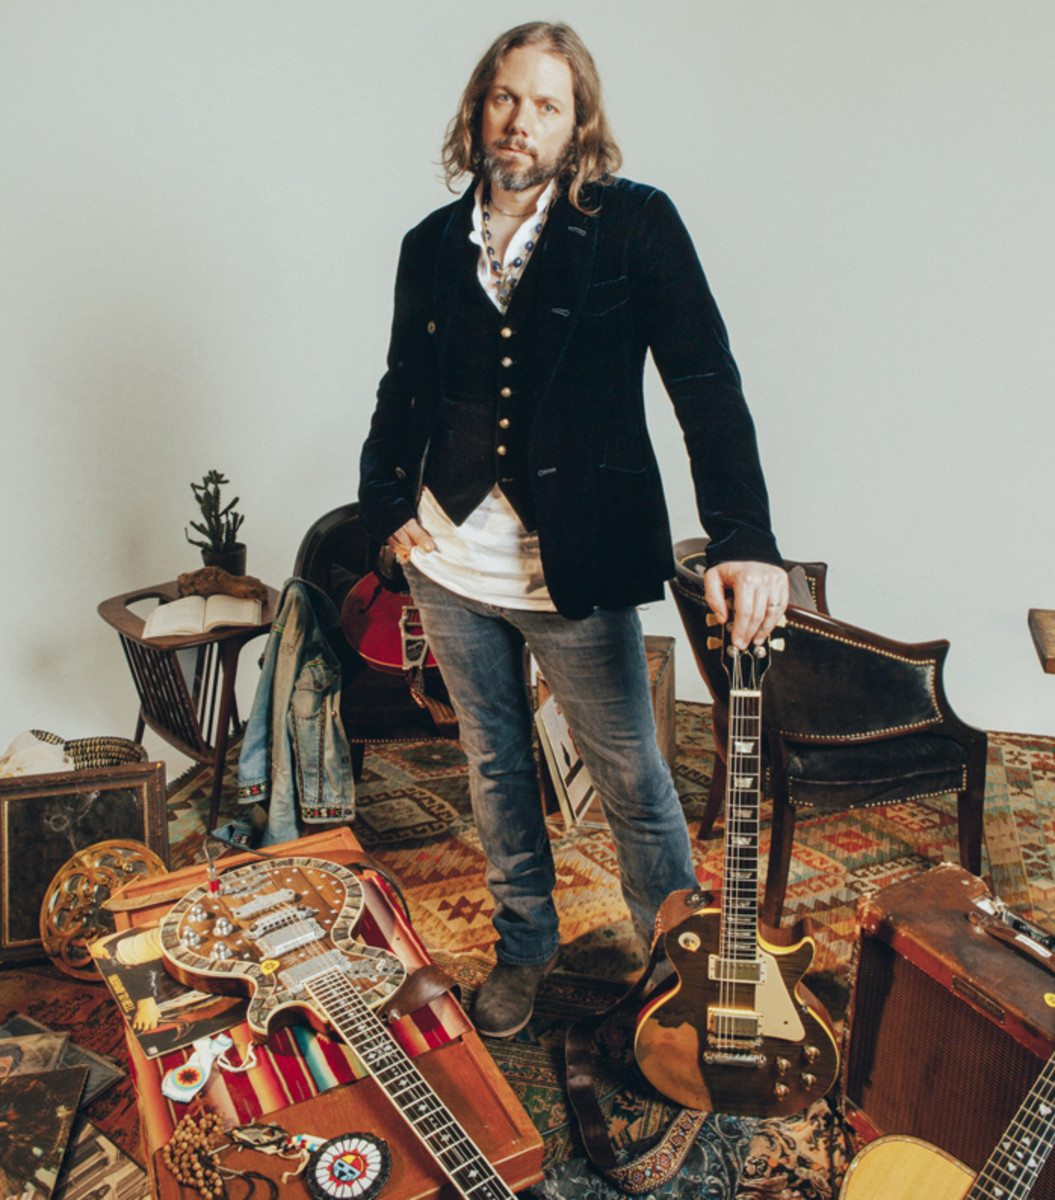  Rich Robinson poses with some of his favorite guitars. Photo by Alysse Gafkjen.